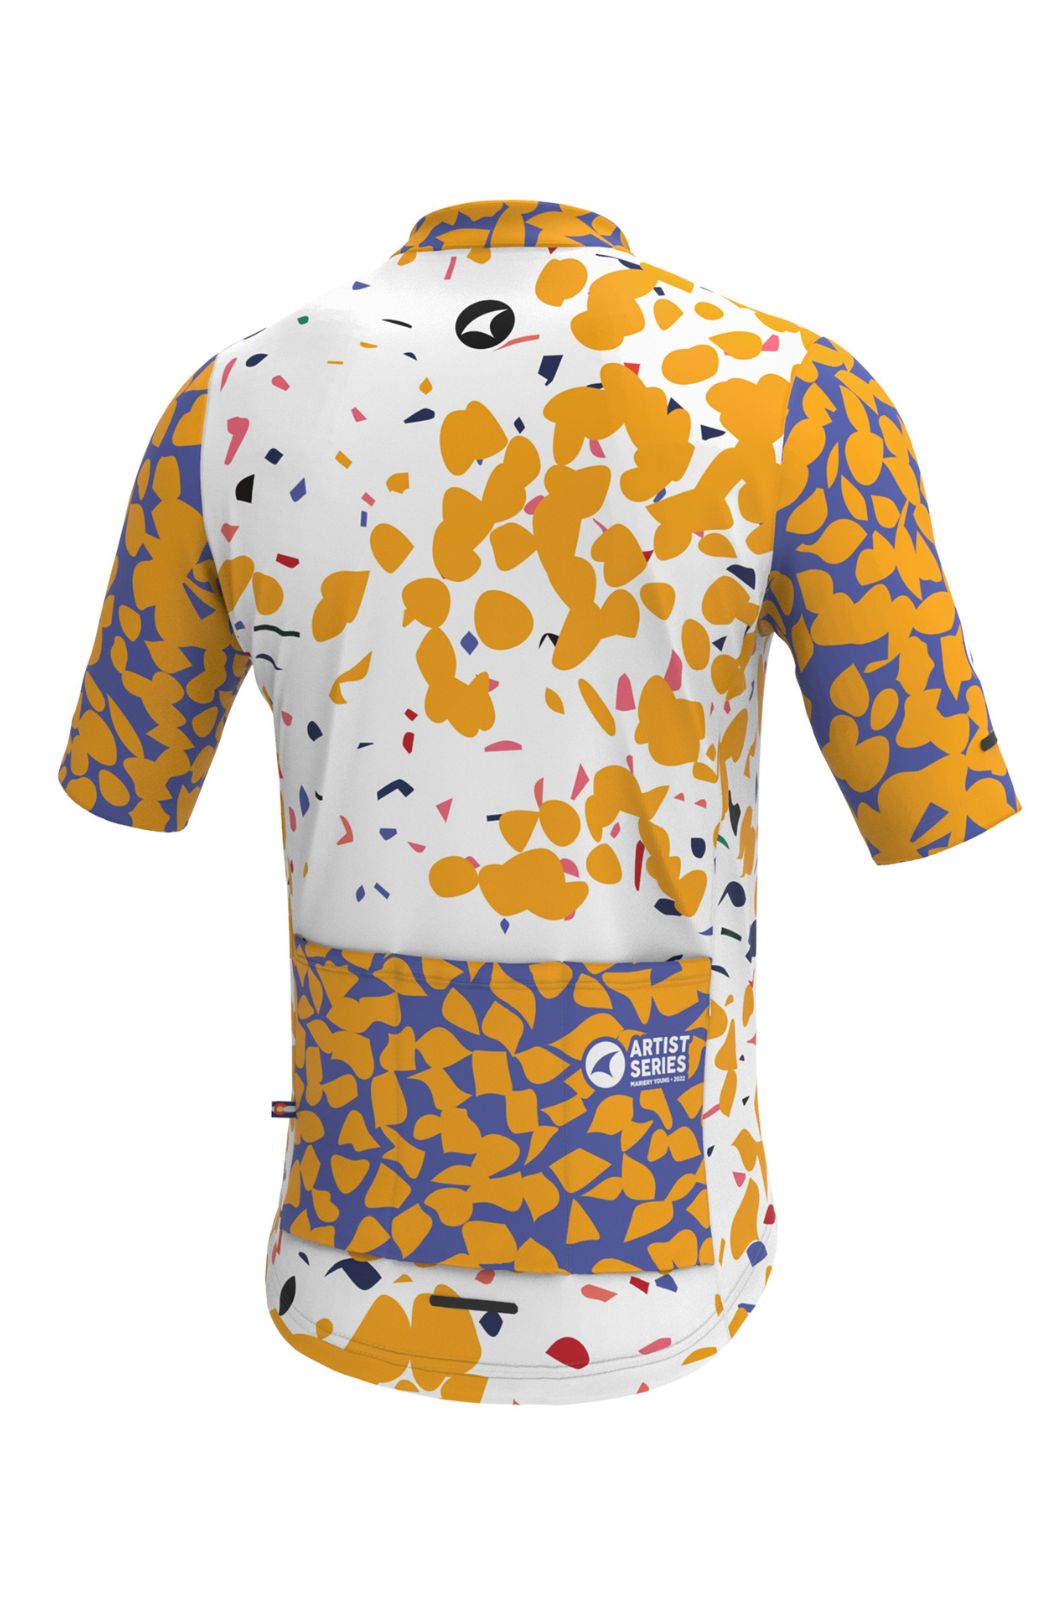 Unique Cycling Jerseys - Men's Quaking Aspen by Mariery Young